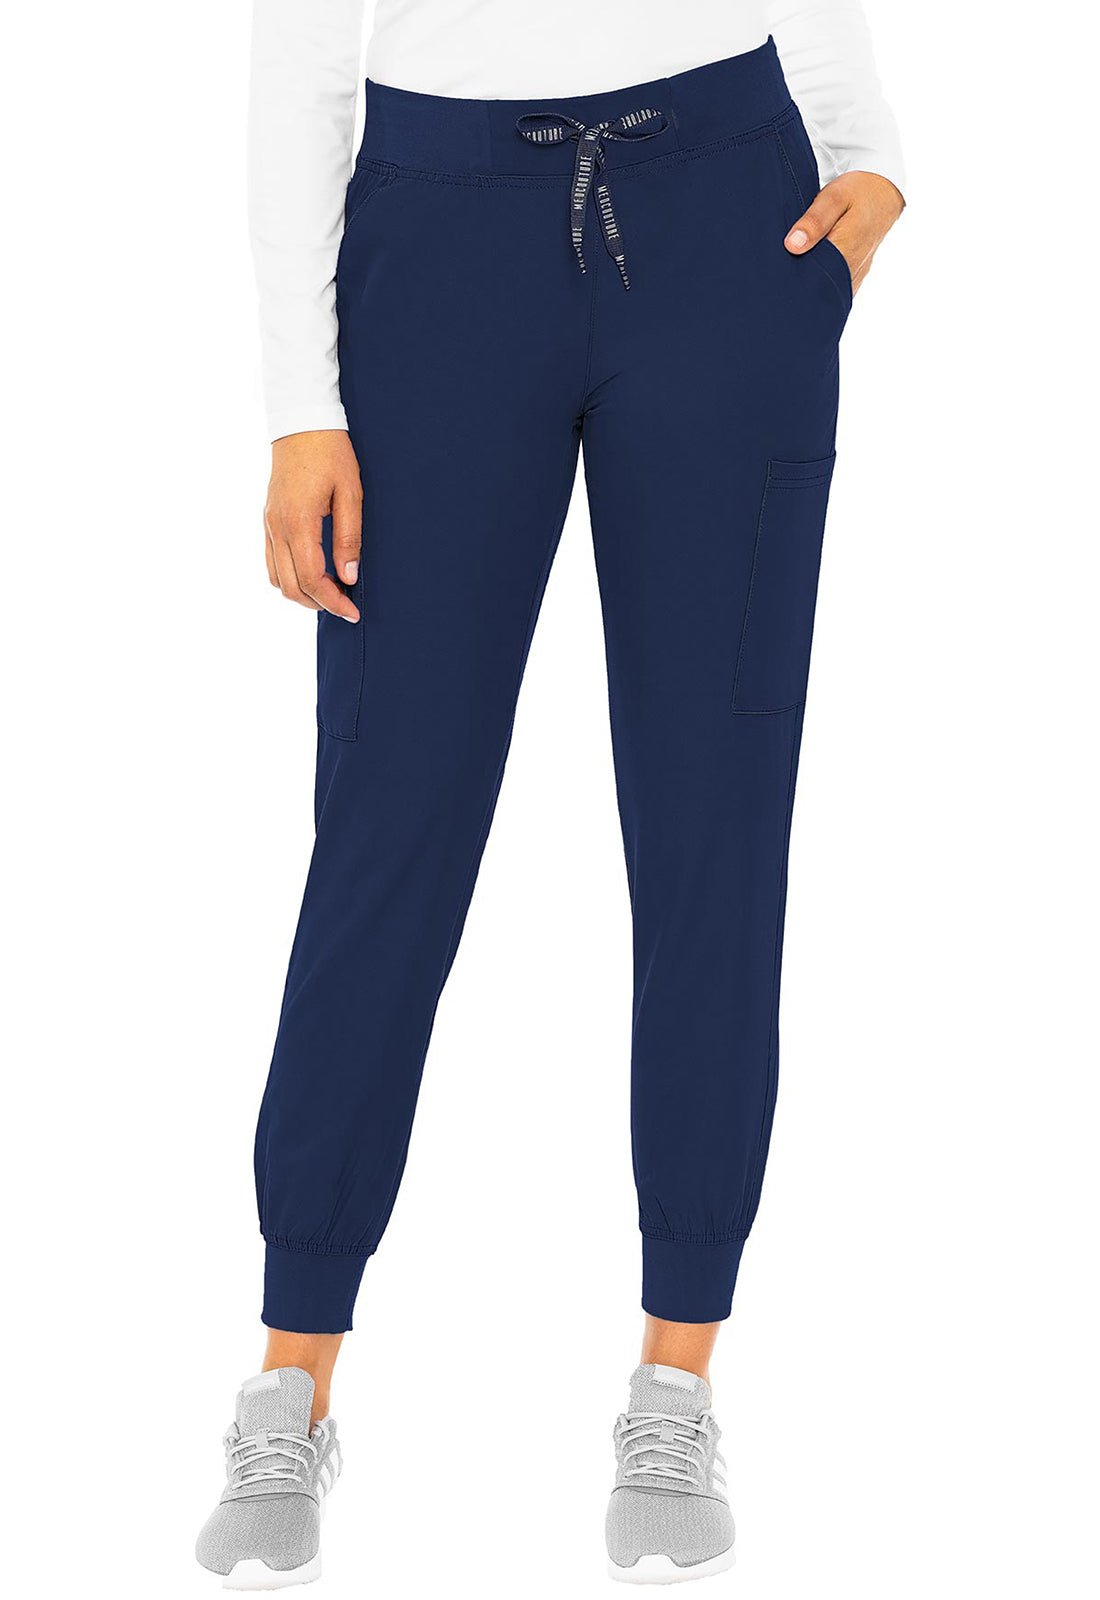 Med Couture Insight Jogger Scrub Pant MC2711 in Black, Navy, Pewter, Royal - Scrubs Select